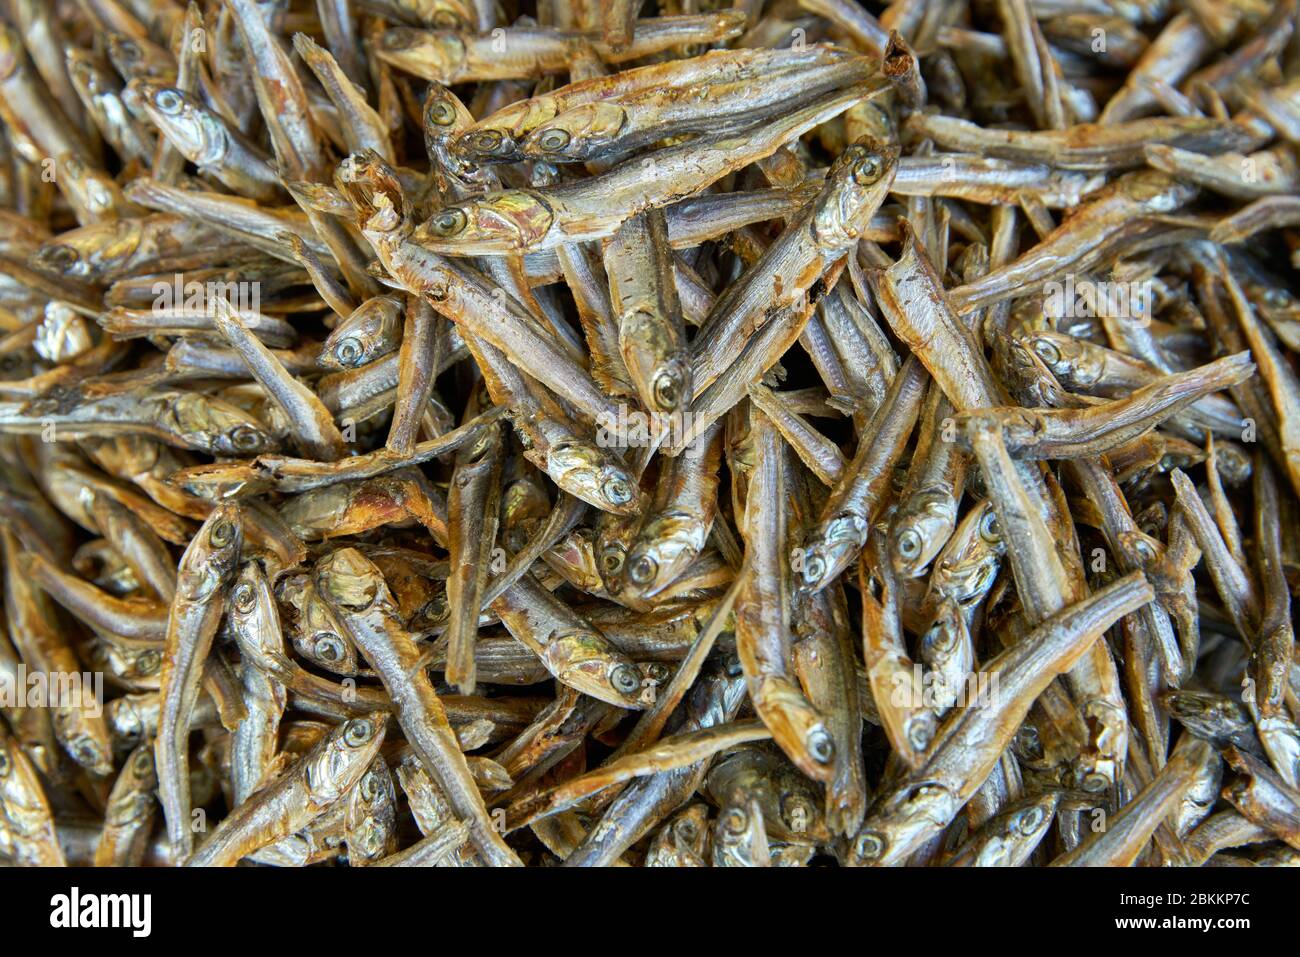 Chinese Market Dried Fish. Small dried fish in an Asian market. Stock Photo